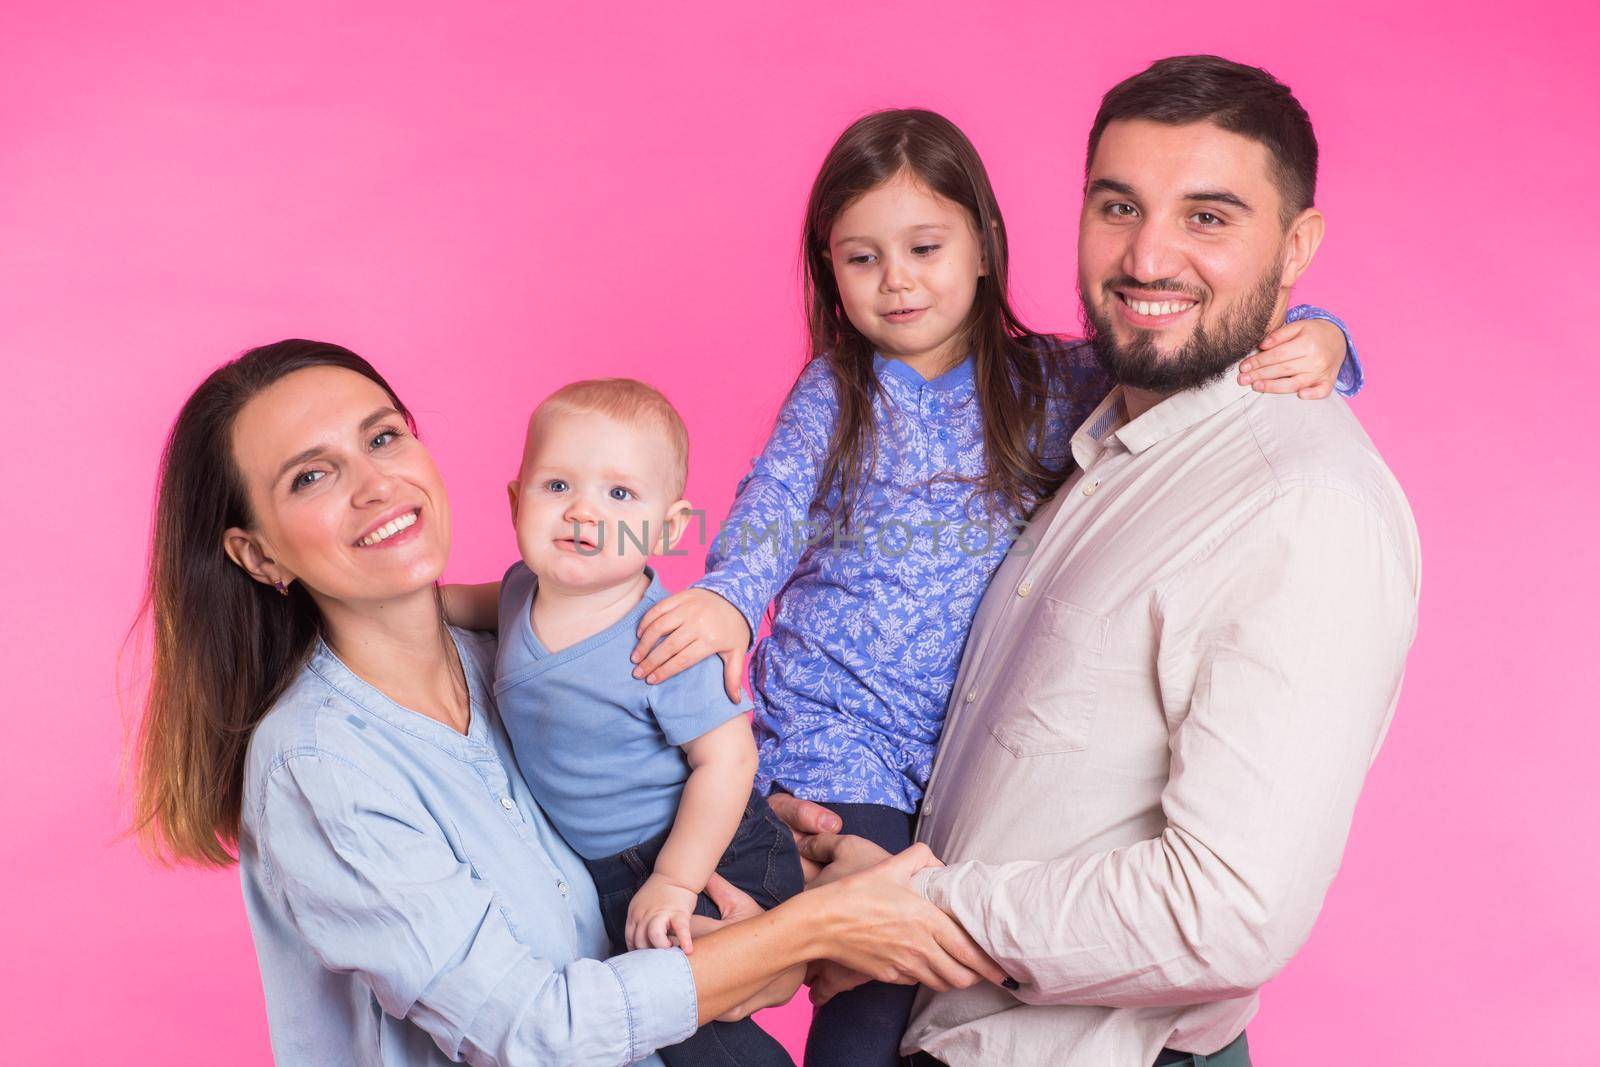 Cute family posing and smiling at camera together on pink background by Satura86